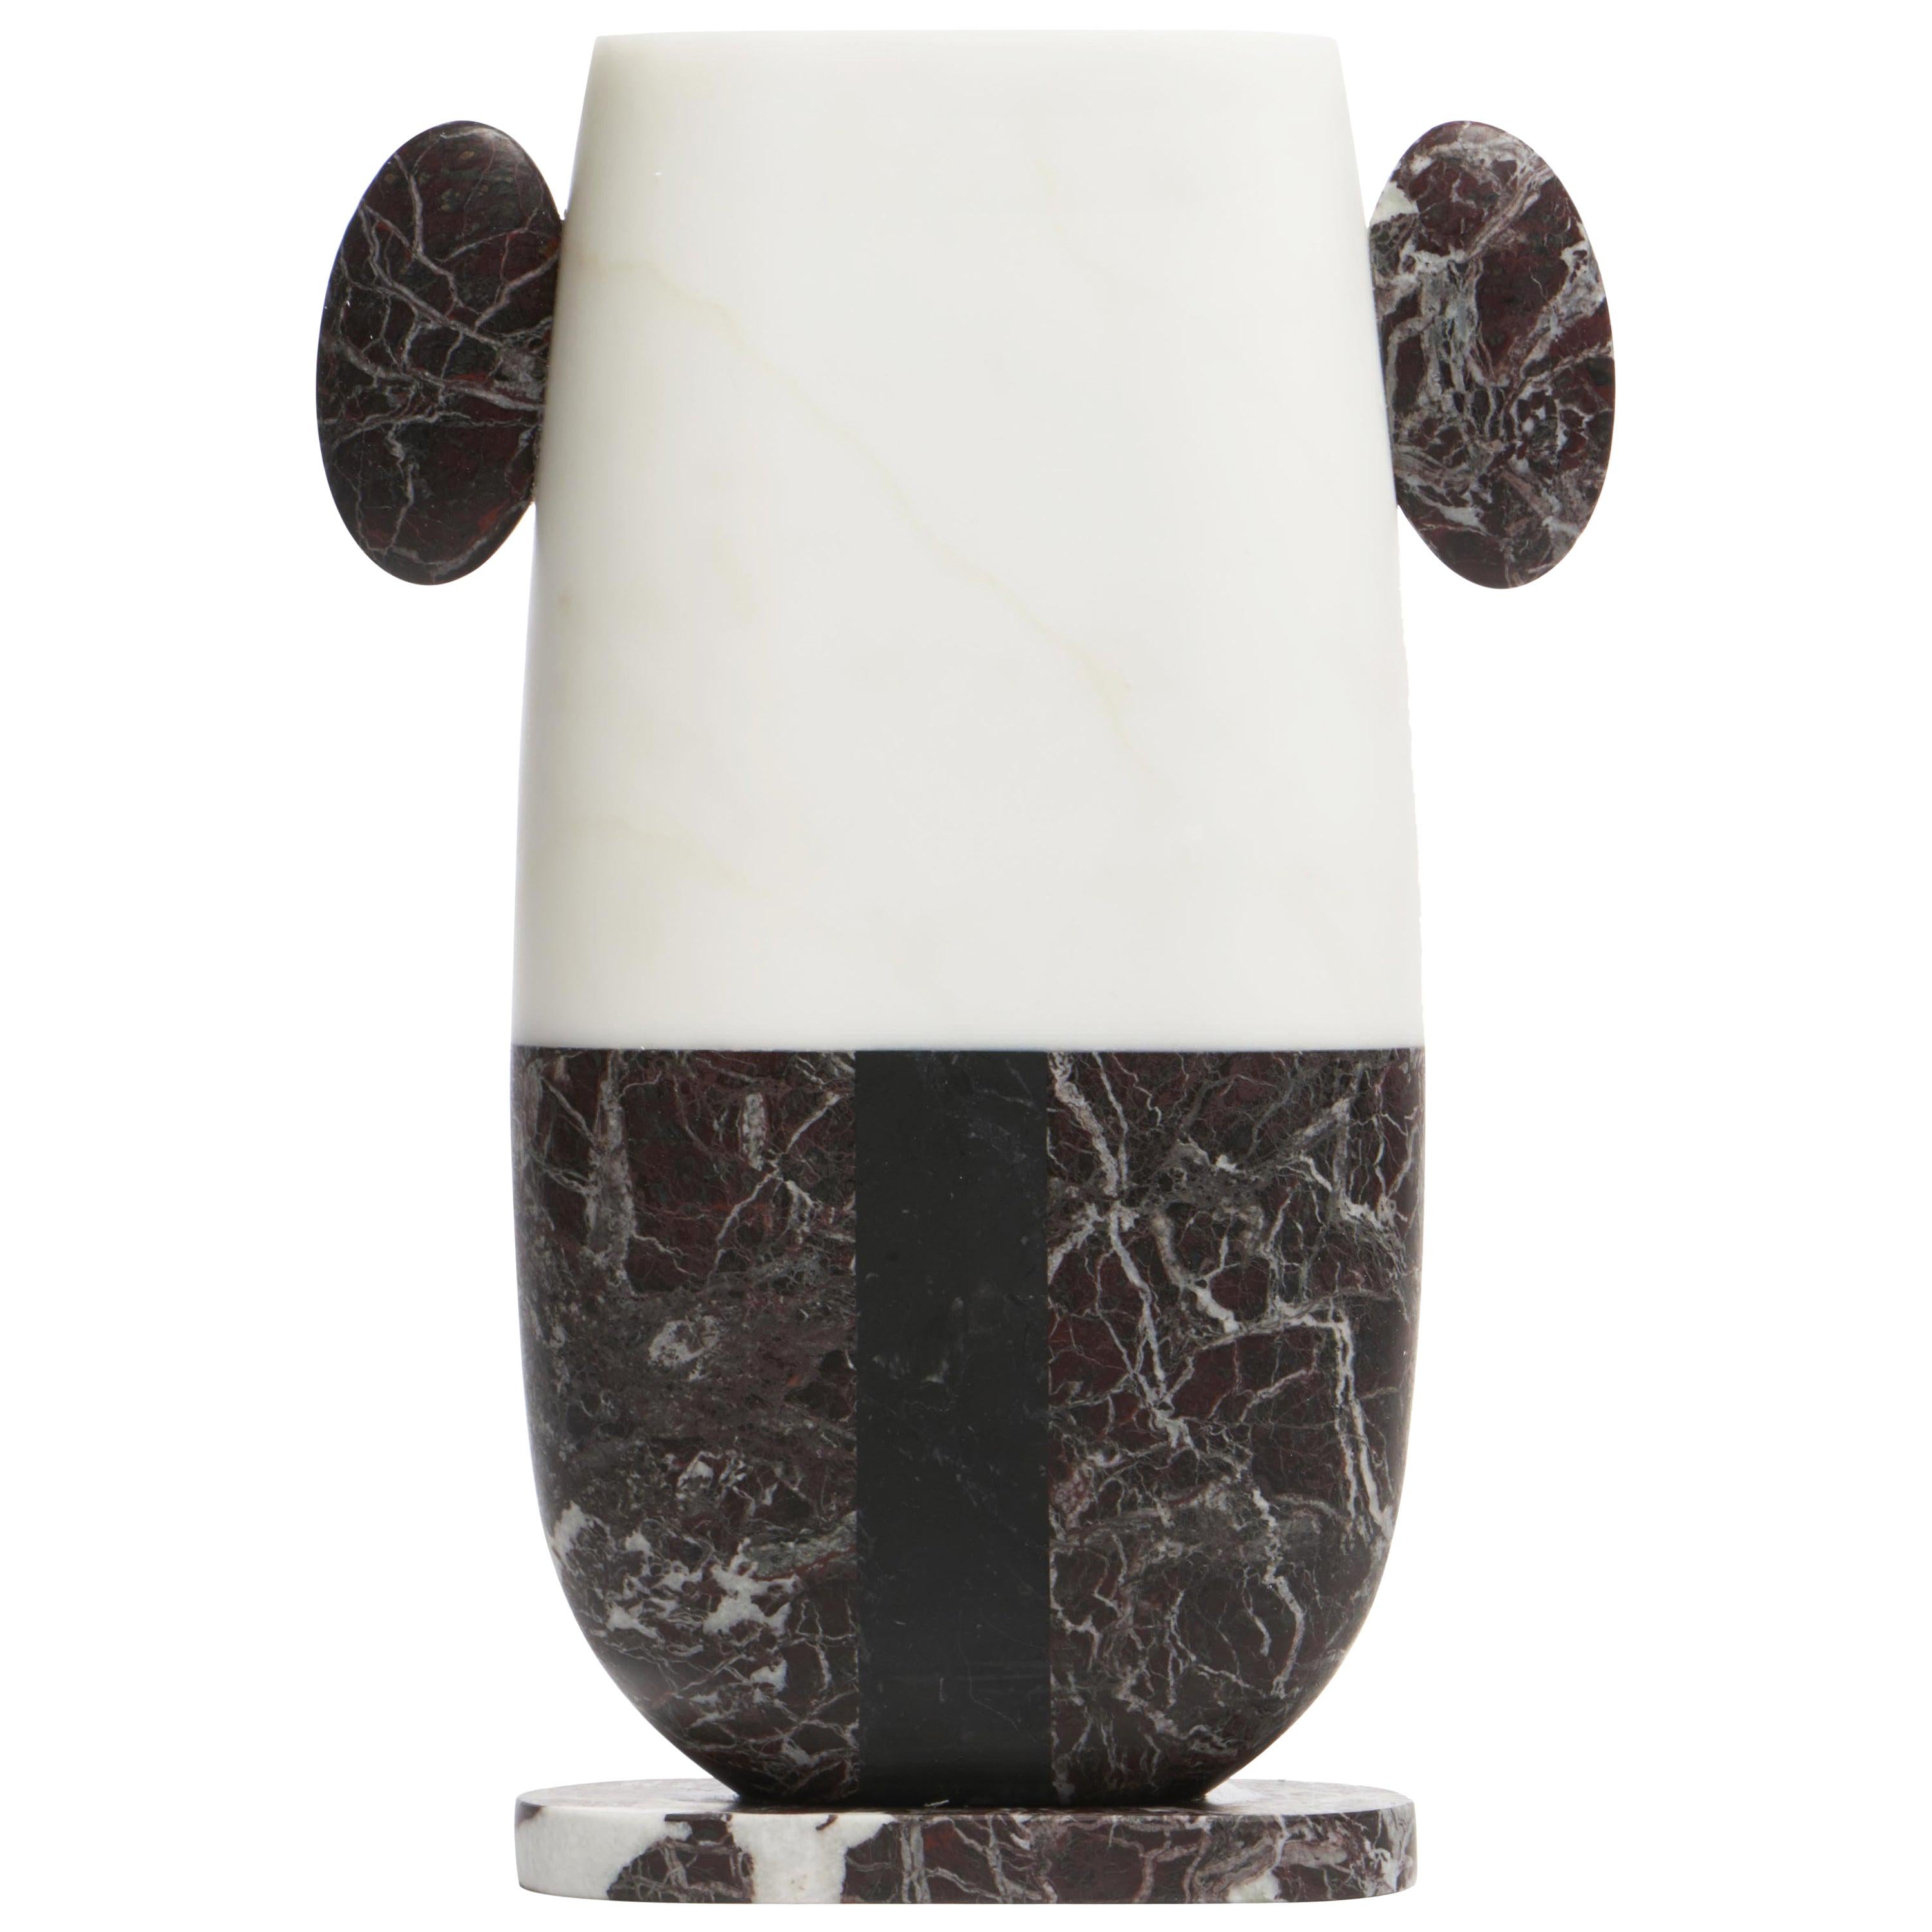 Vase in White, Red and Black Marbles by Matteo Cibic, Made in Italy in Stock